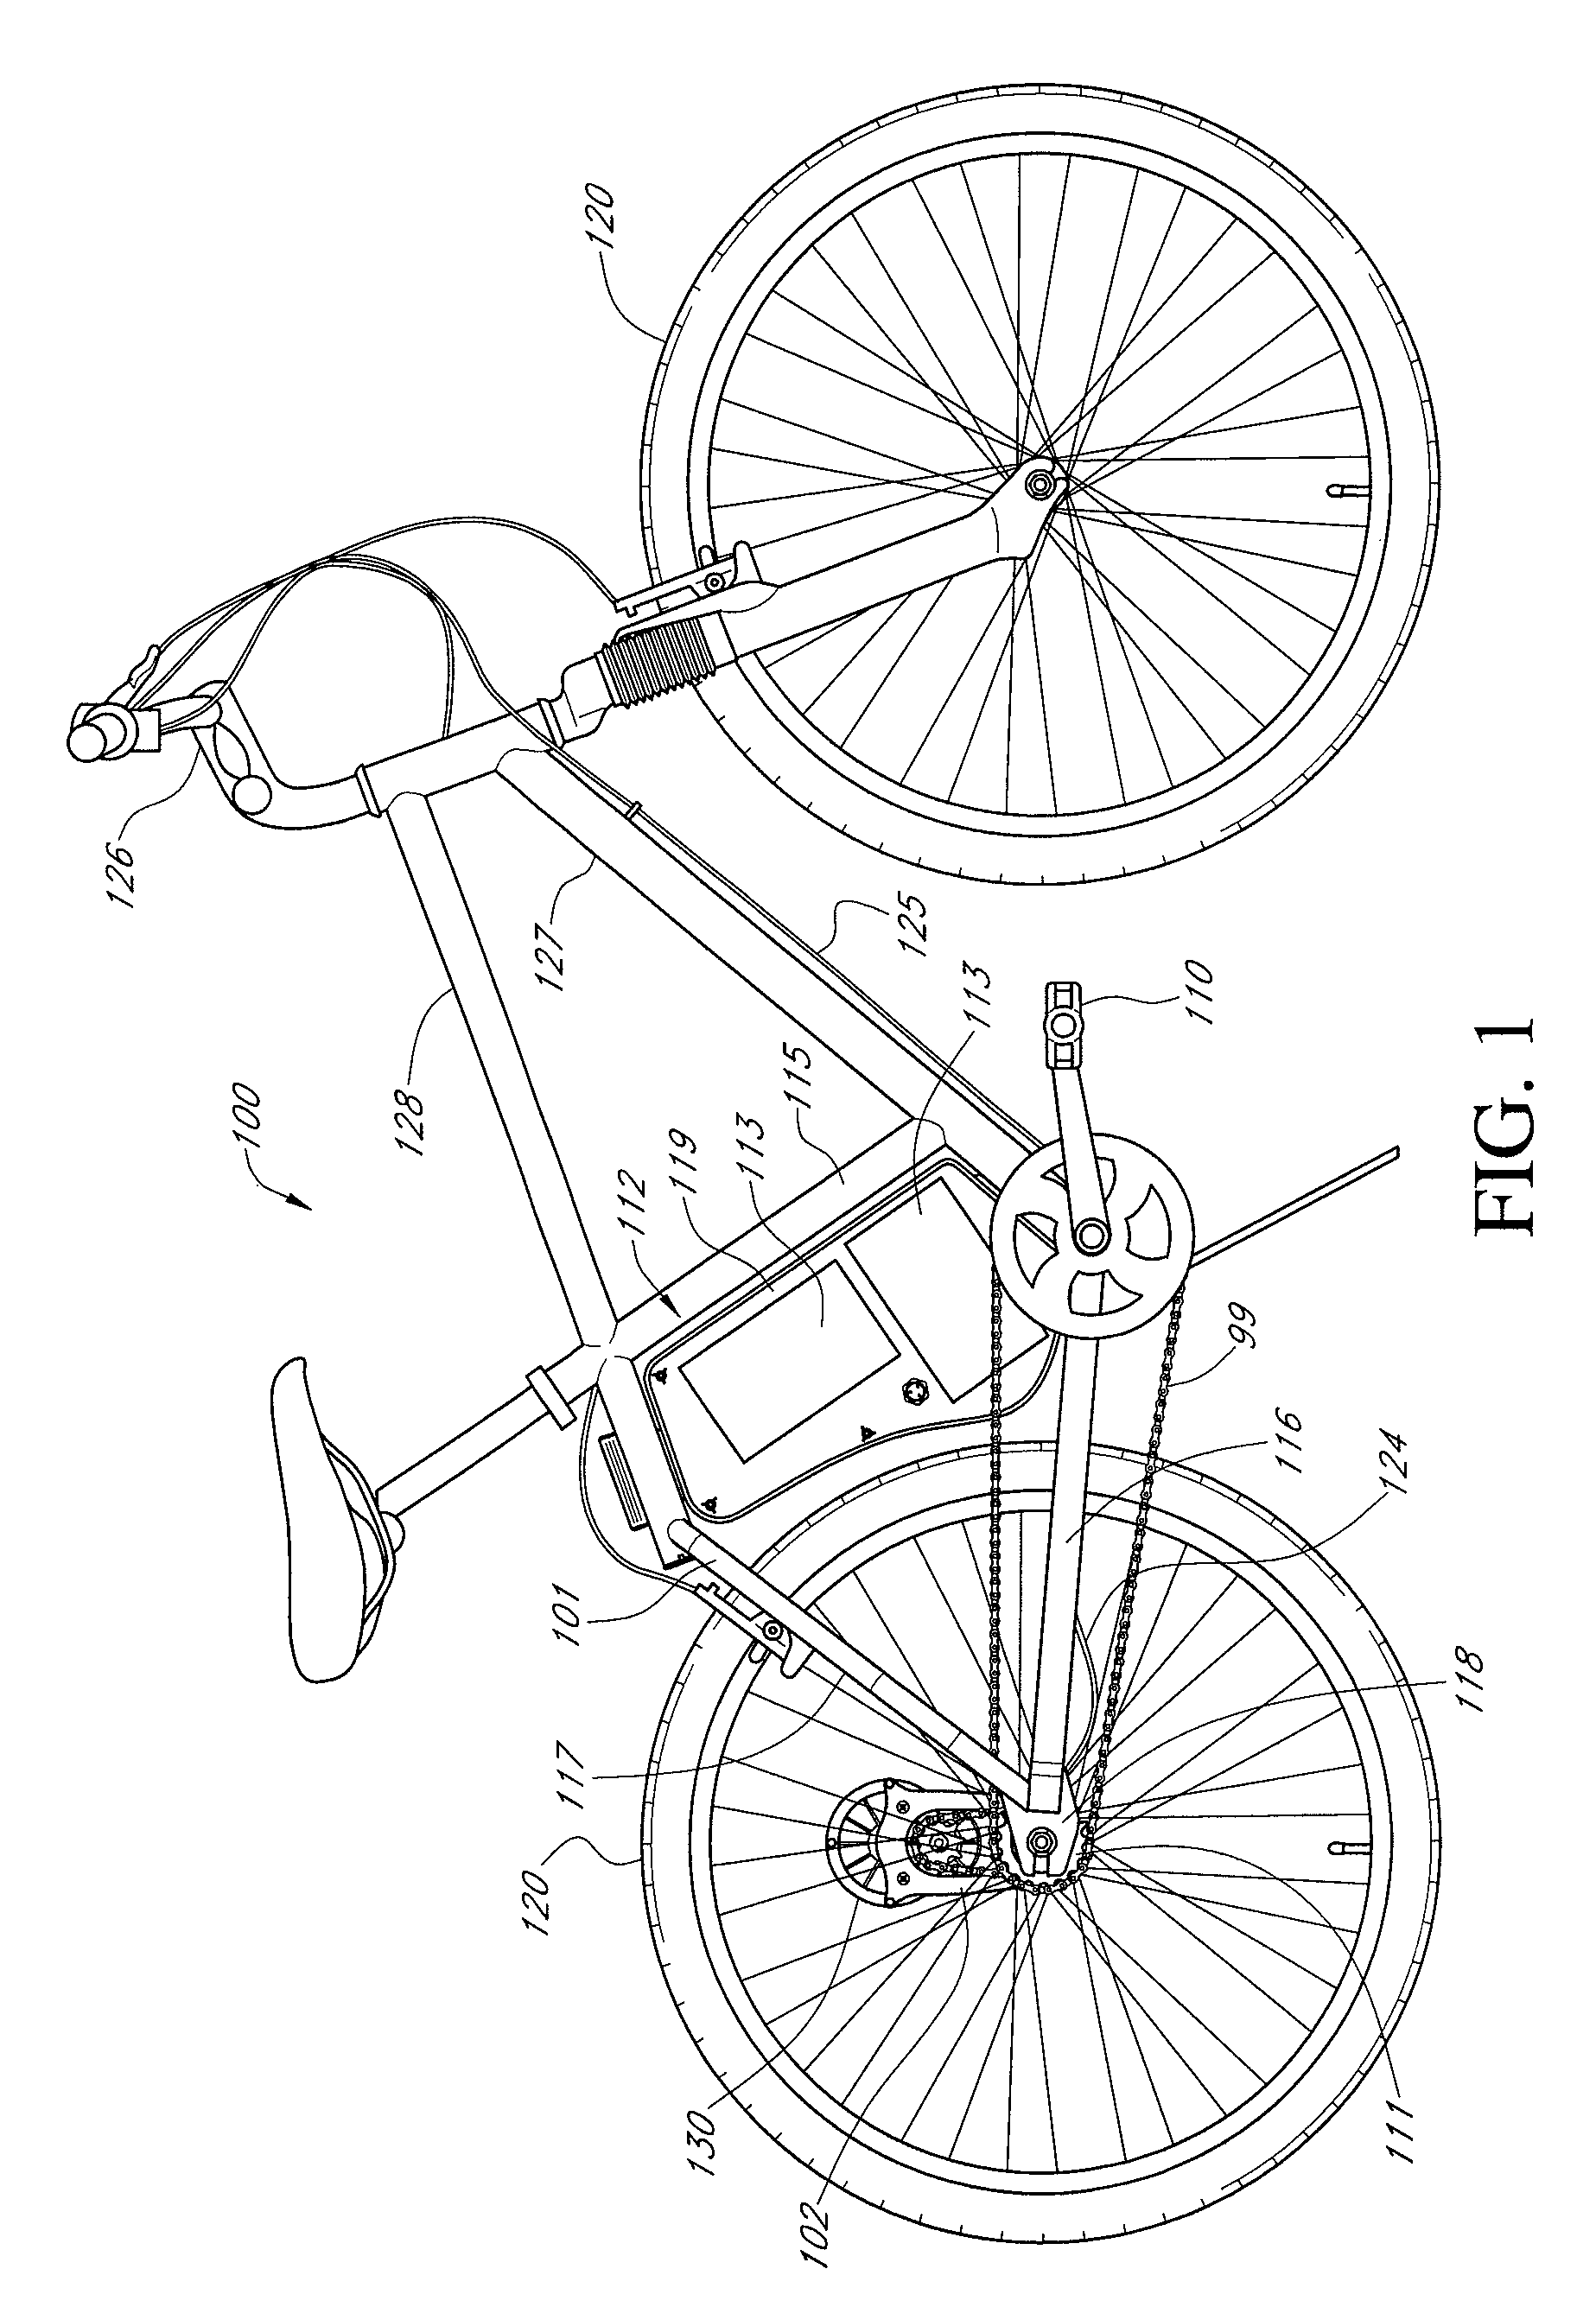 Adjustable power unit mounting attachment for vehicle